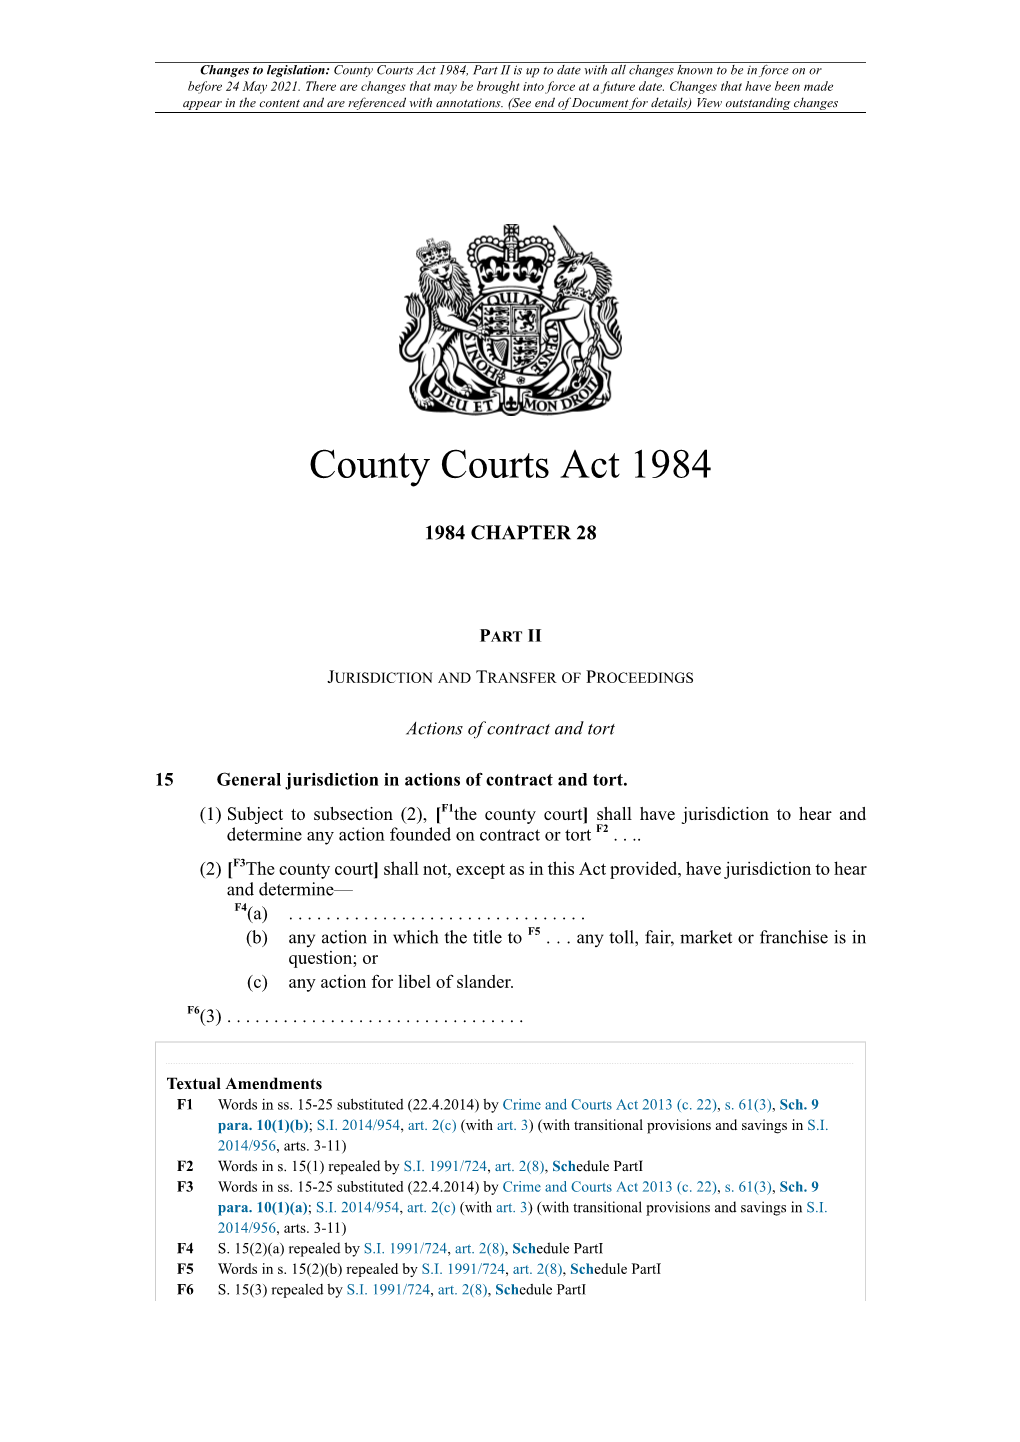 County Courts Act 1984, Part II Is up to Date with All Changes Known to Be in Force on Or Before 24 May 2021